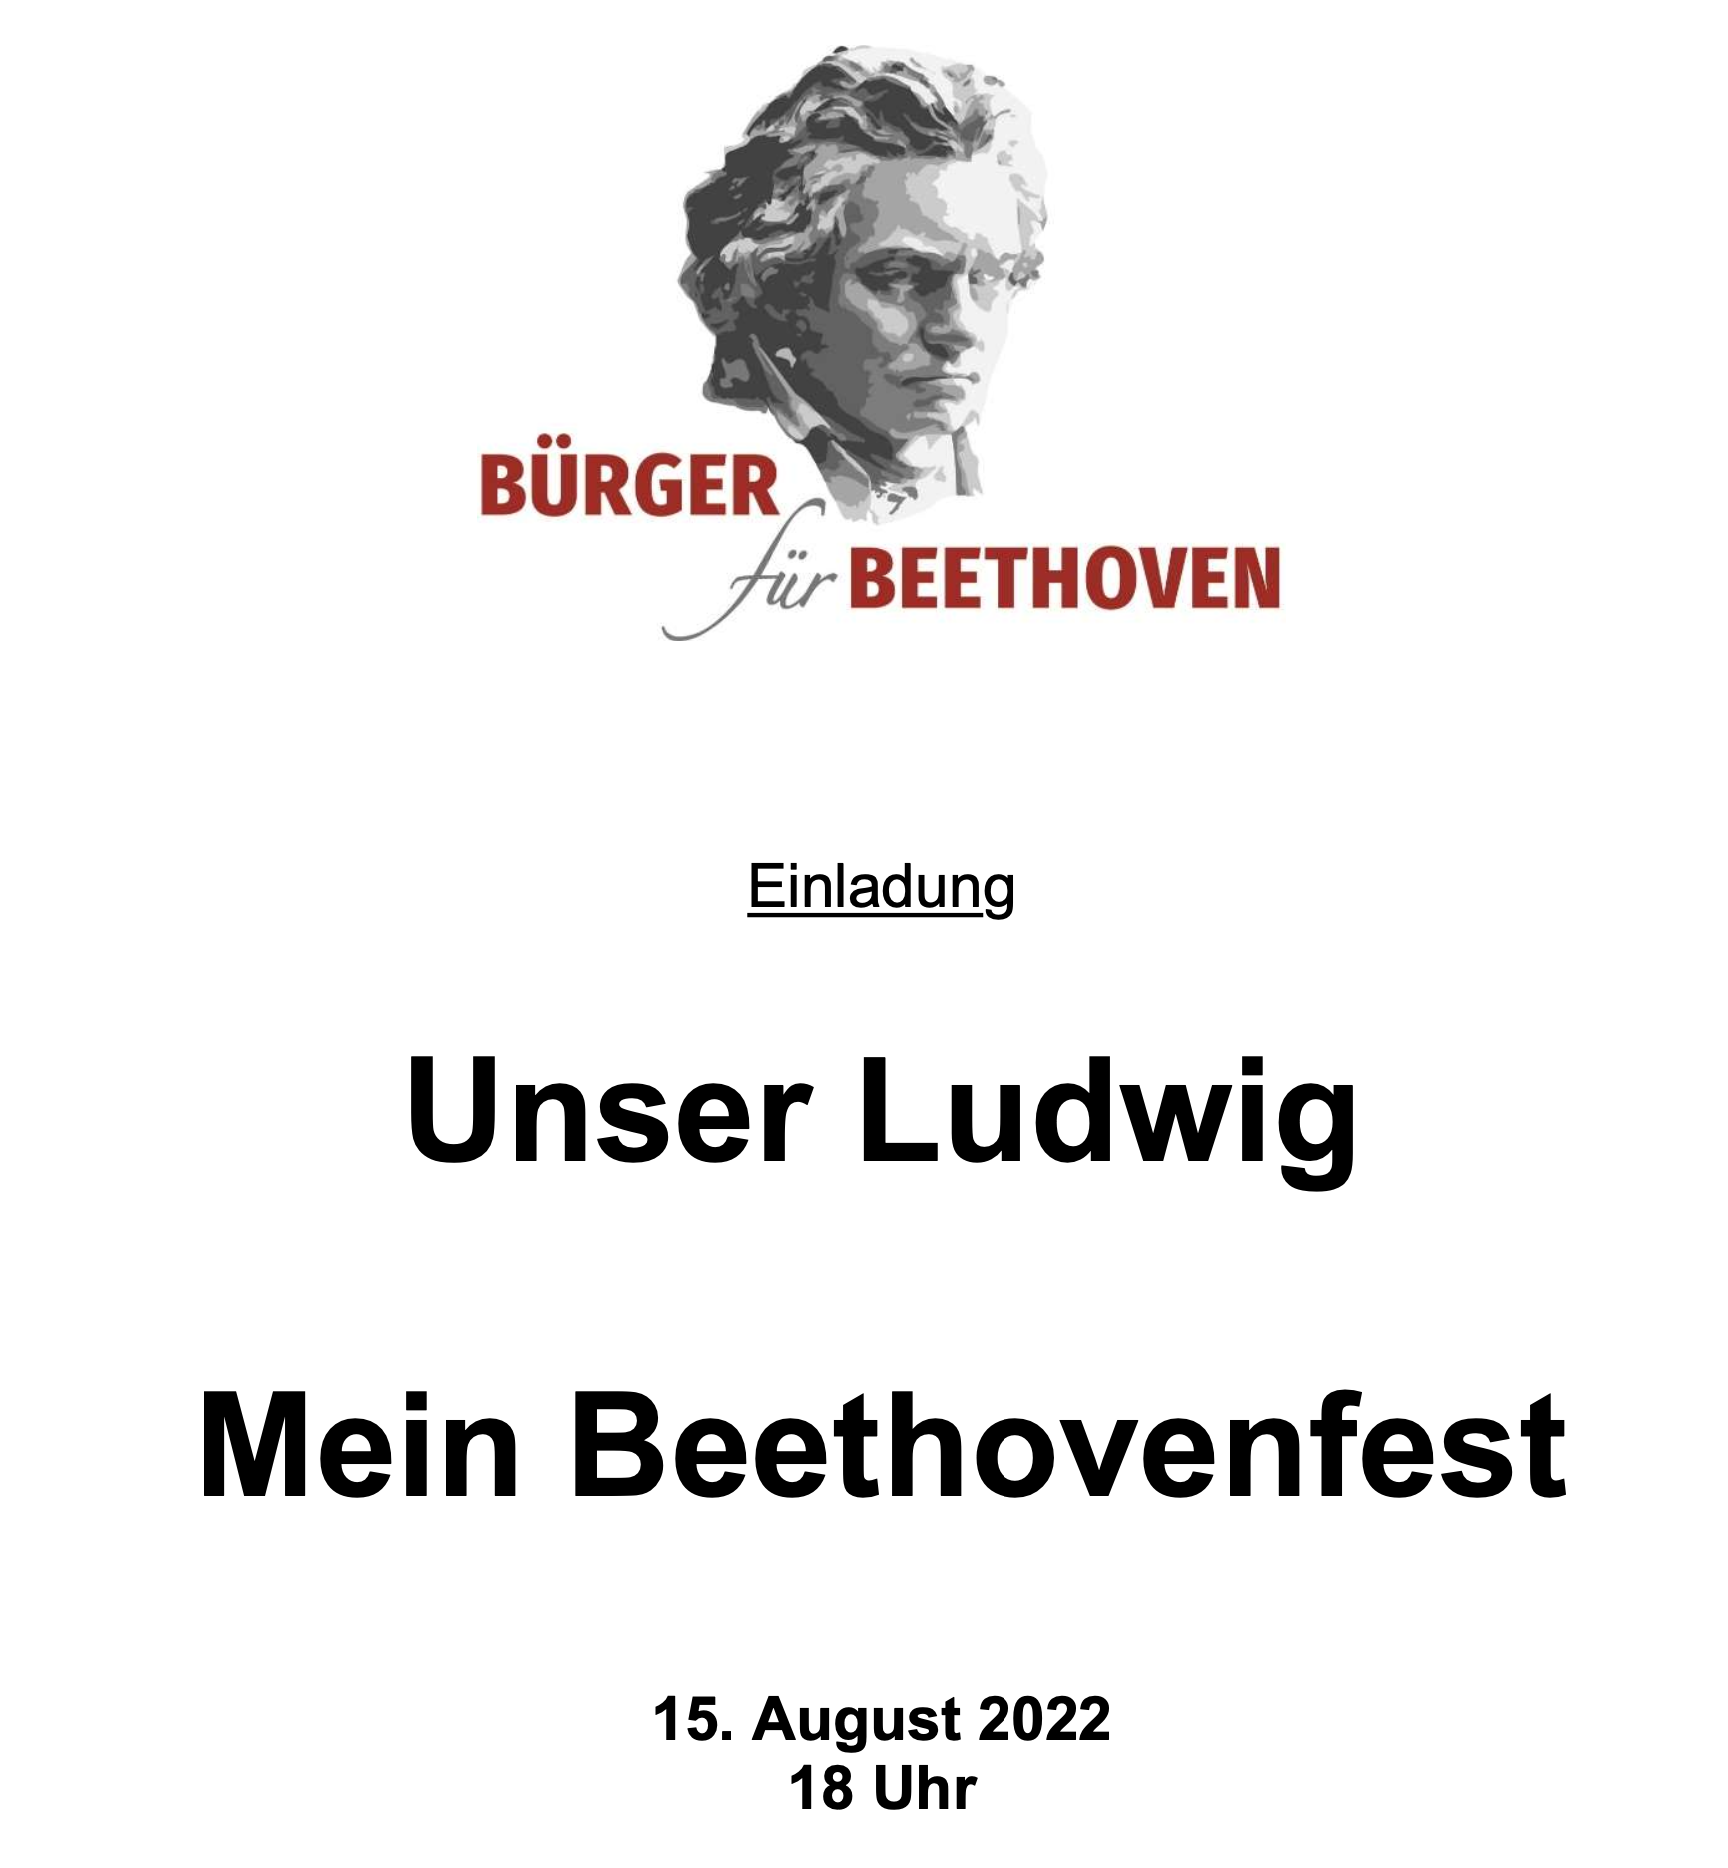 UNSER LUDWIG - MEIN BEETHOVENFEST war am 15. August